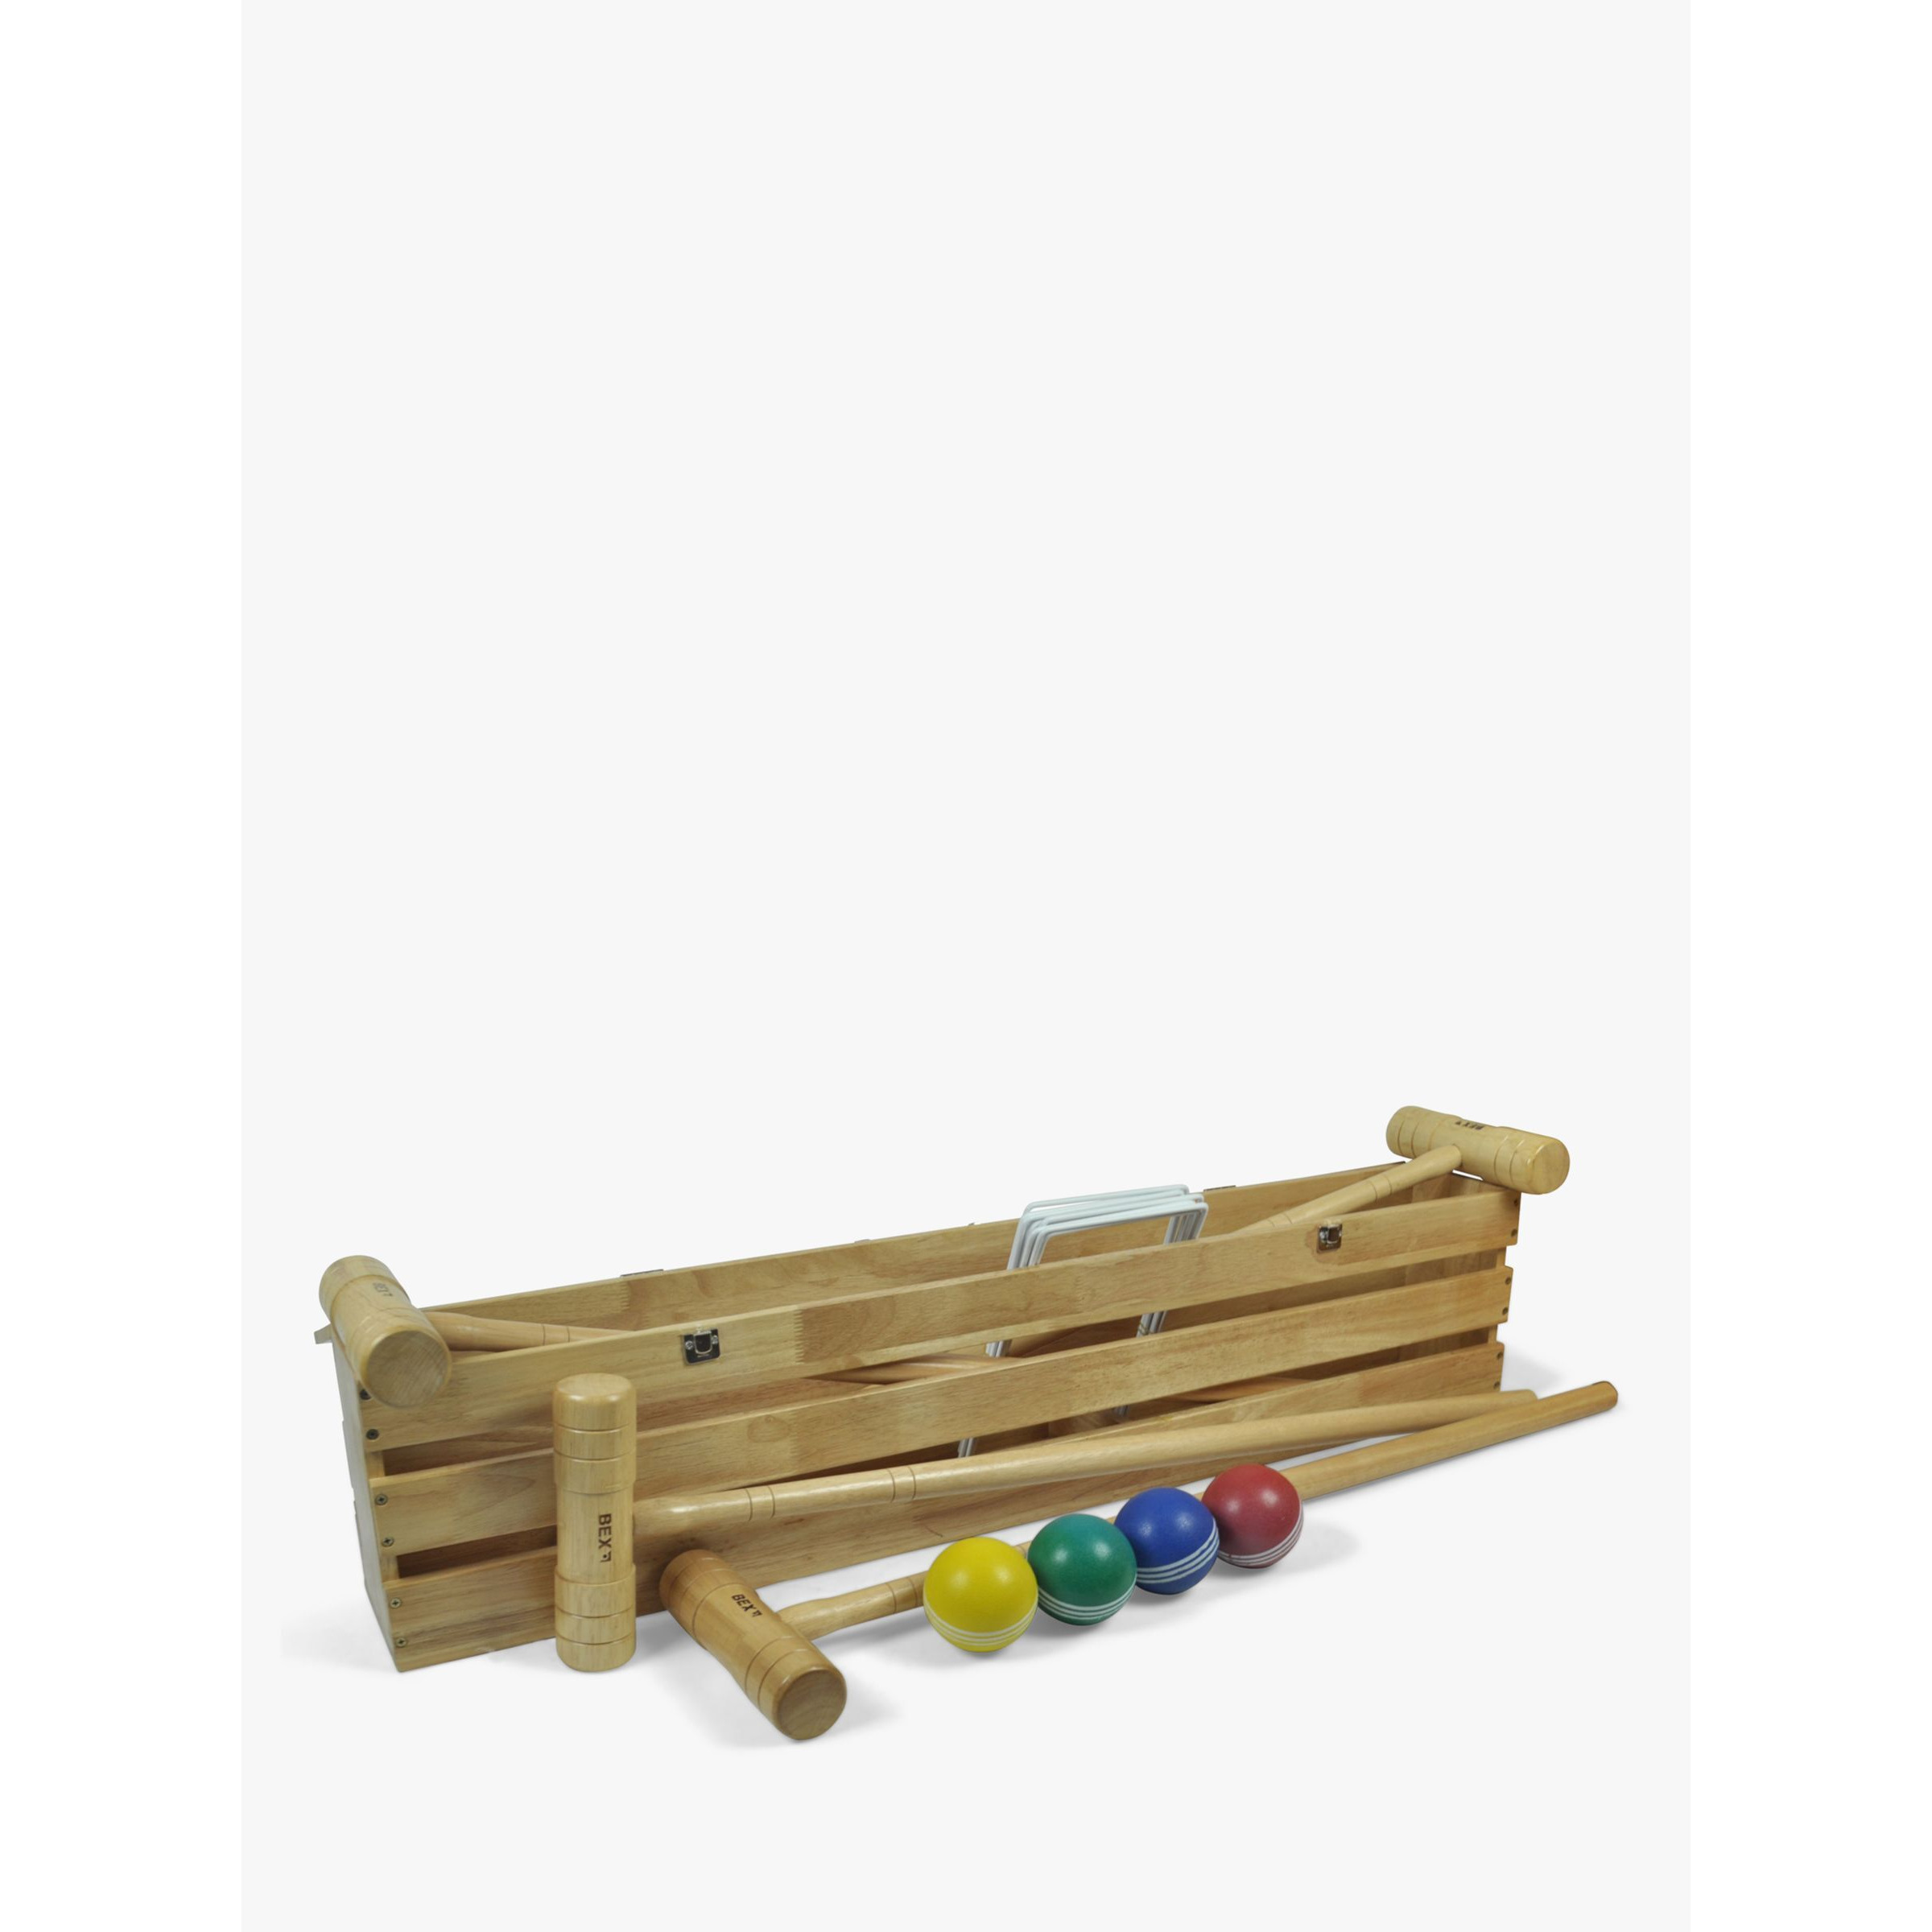 Bex Croquet Pro Game in a Wooden Box - image 1